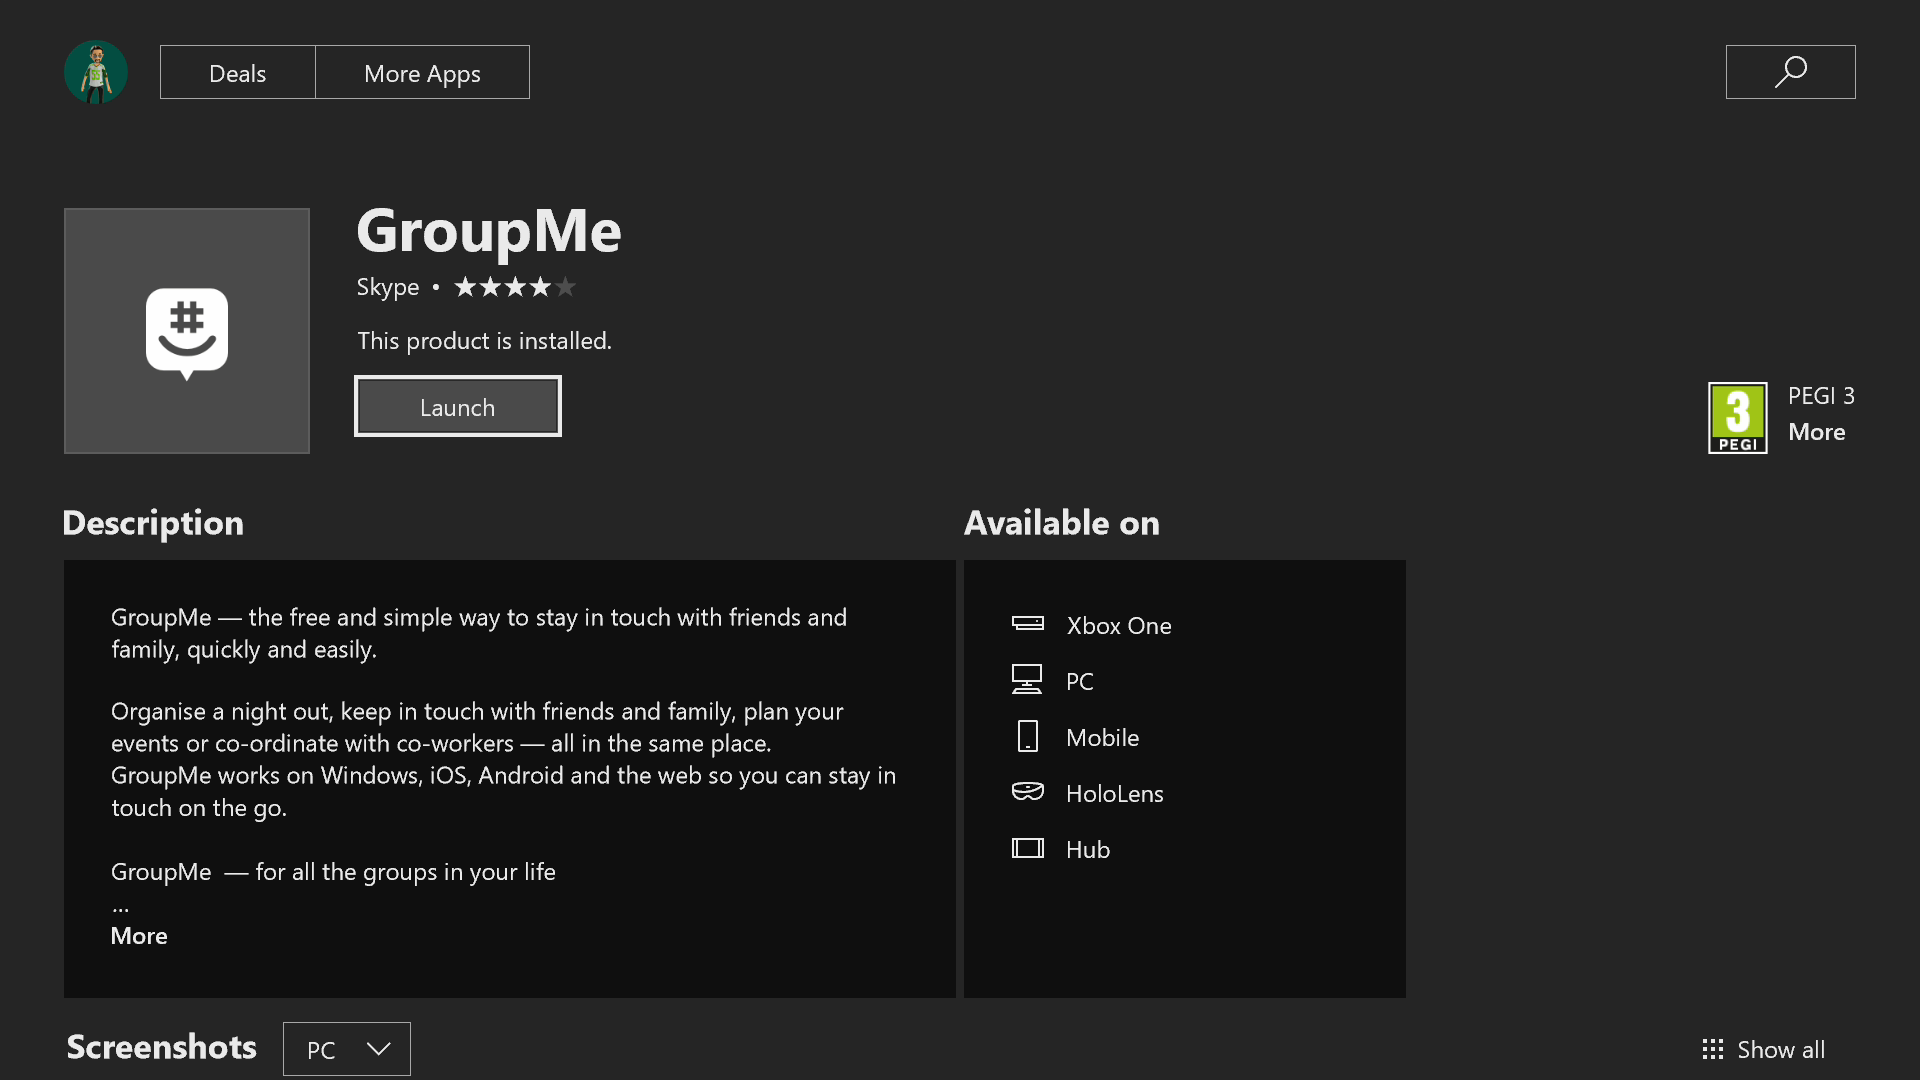 GroupMe is now available on Xbox One